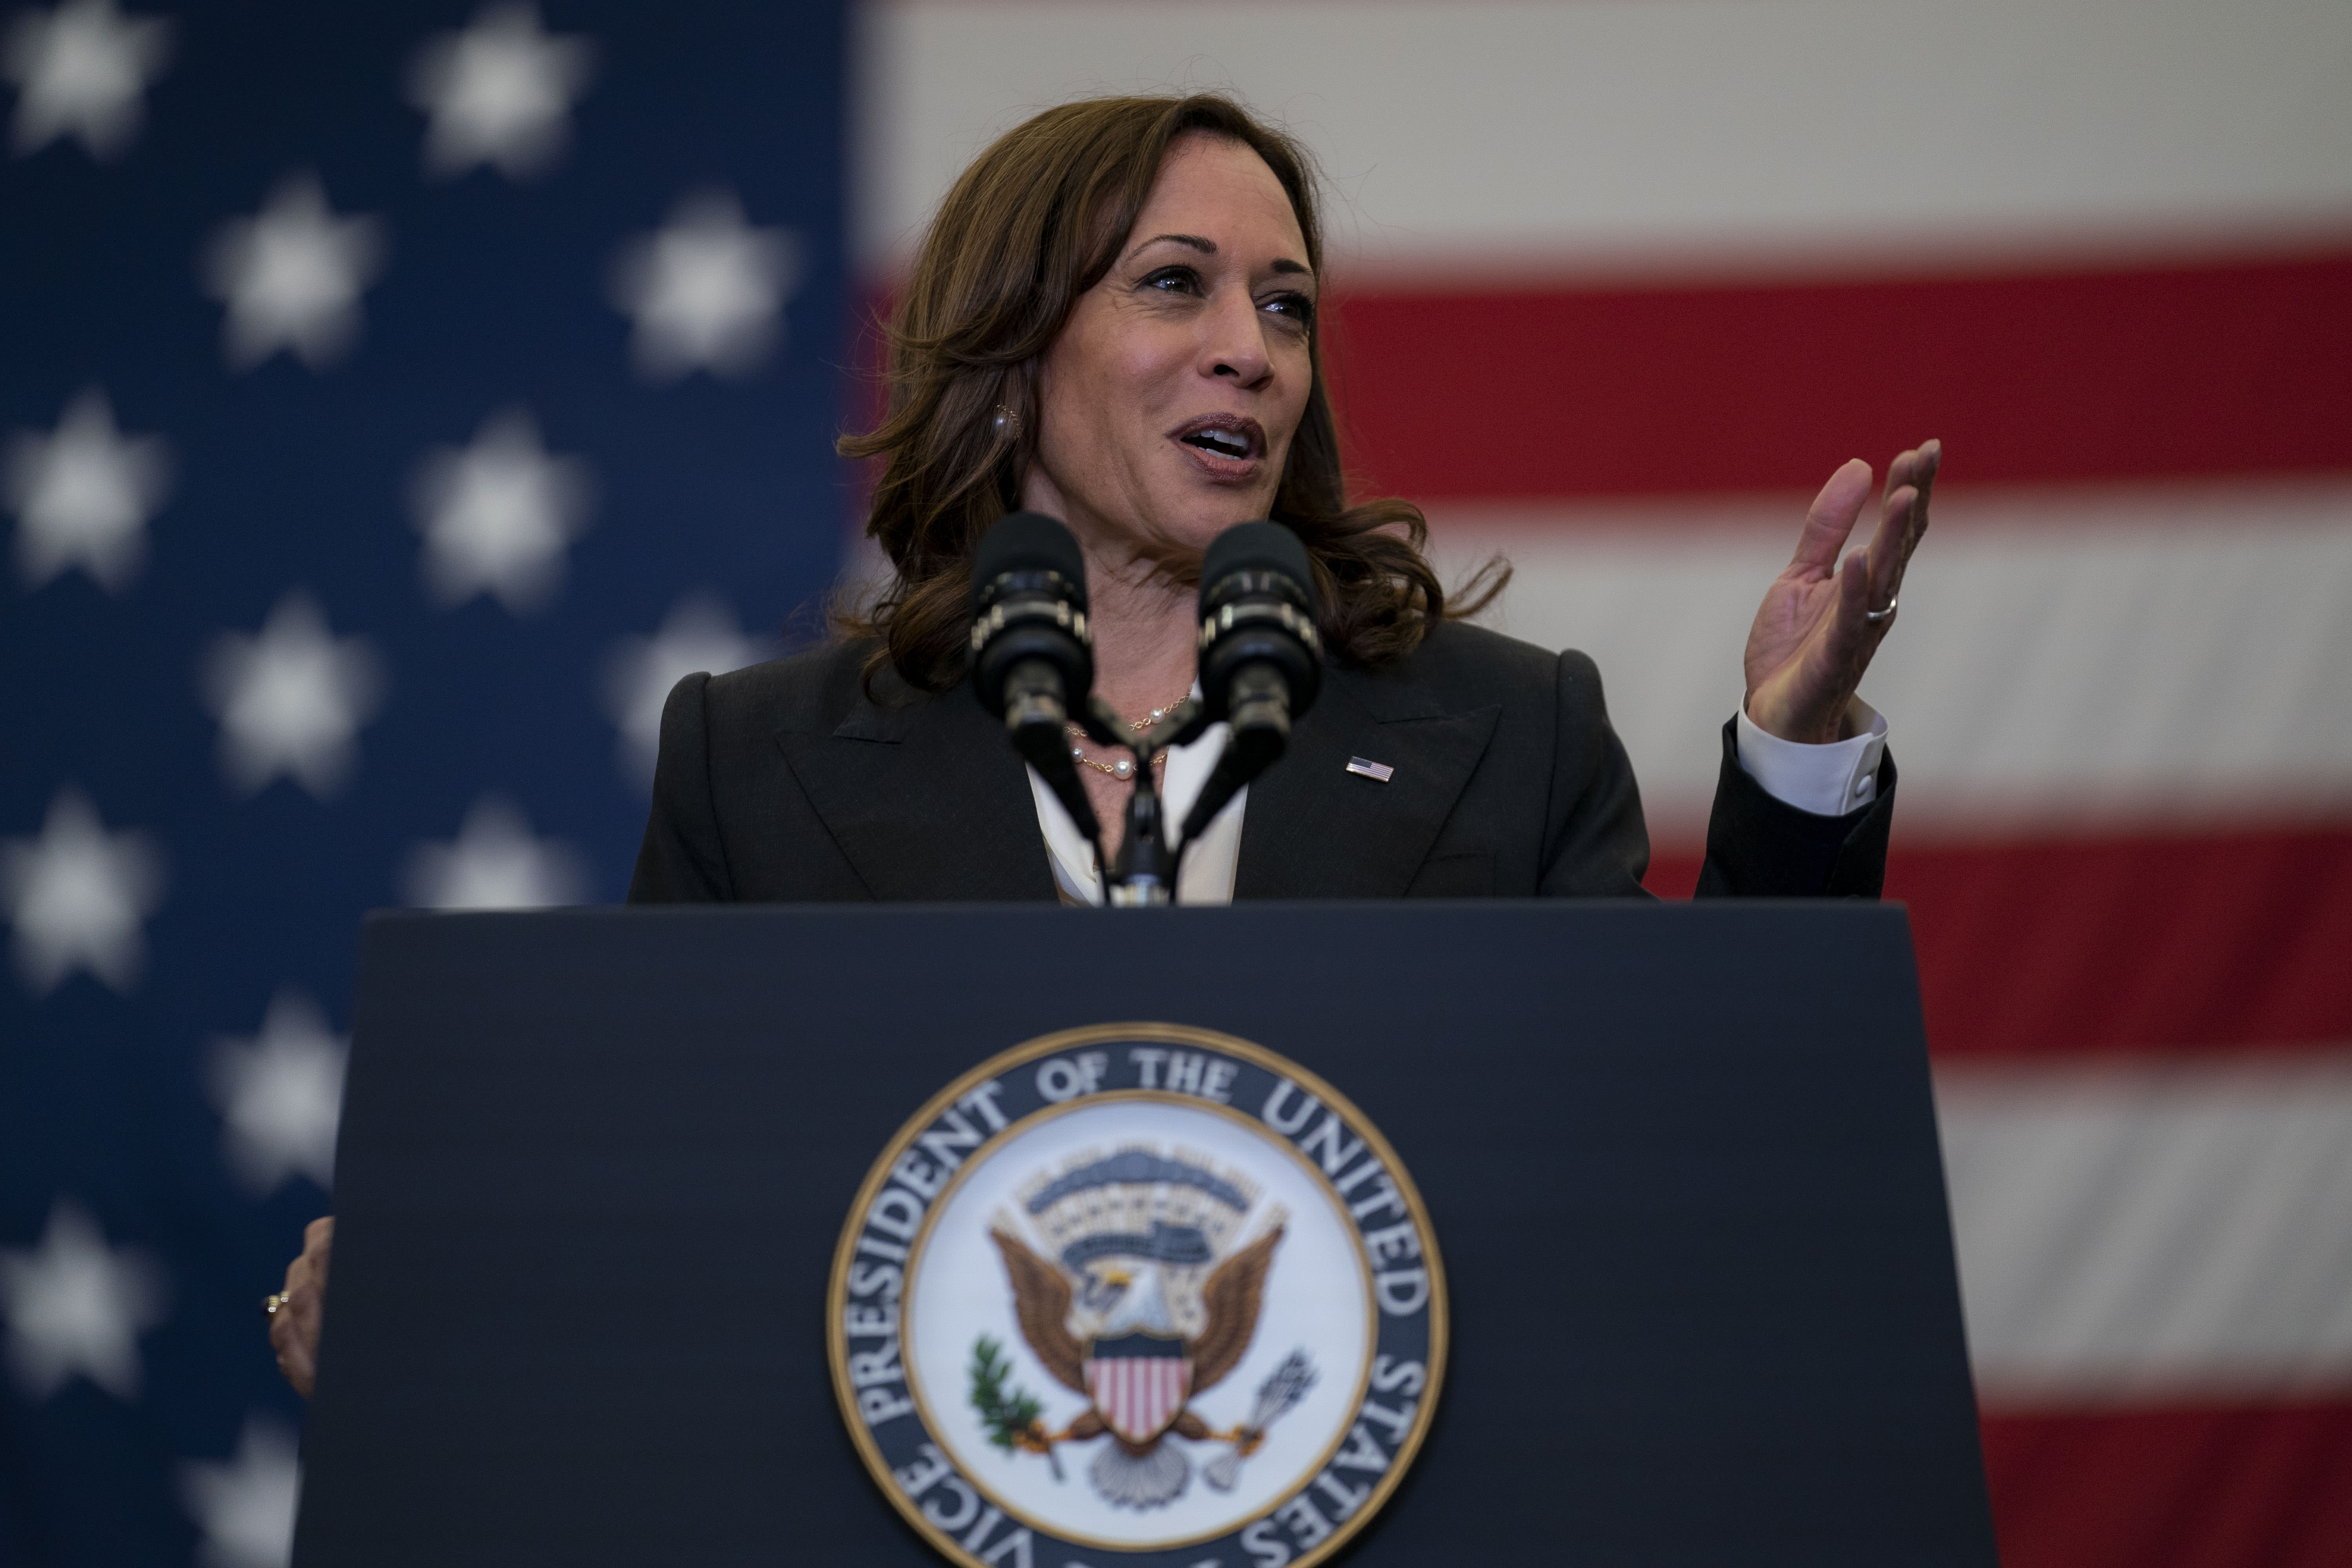 Column: California's Kamala Harris was the necessary choice but not the best candidate